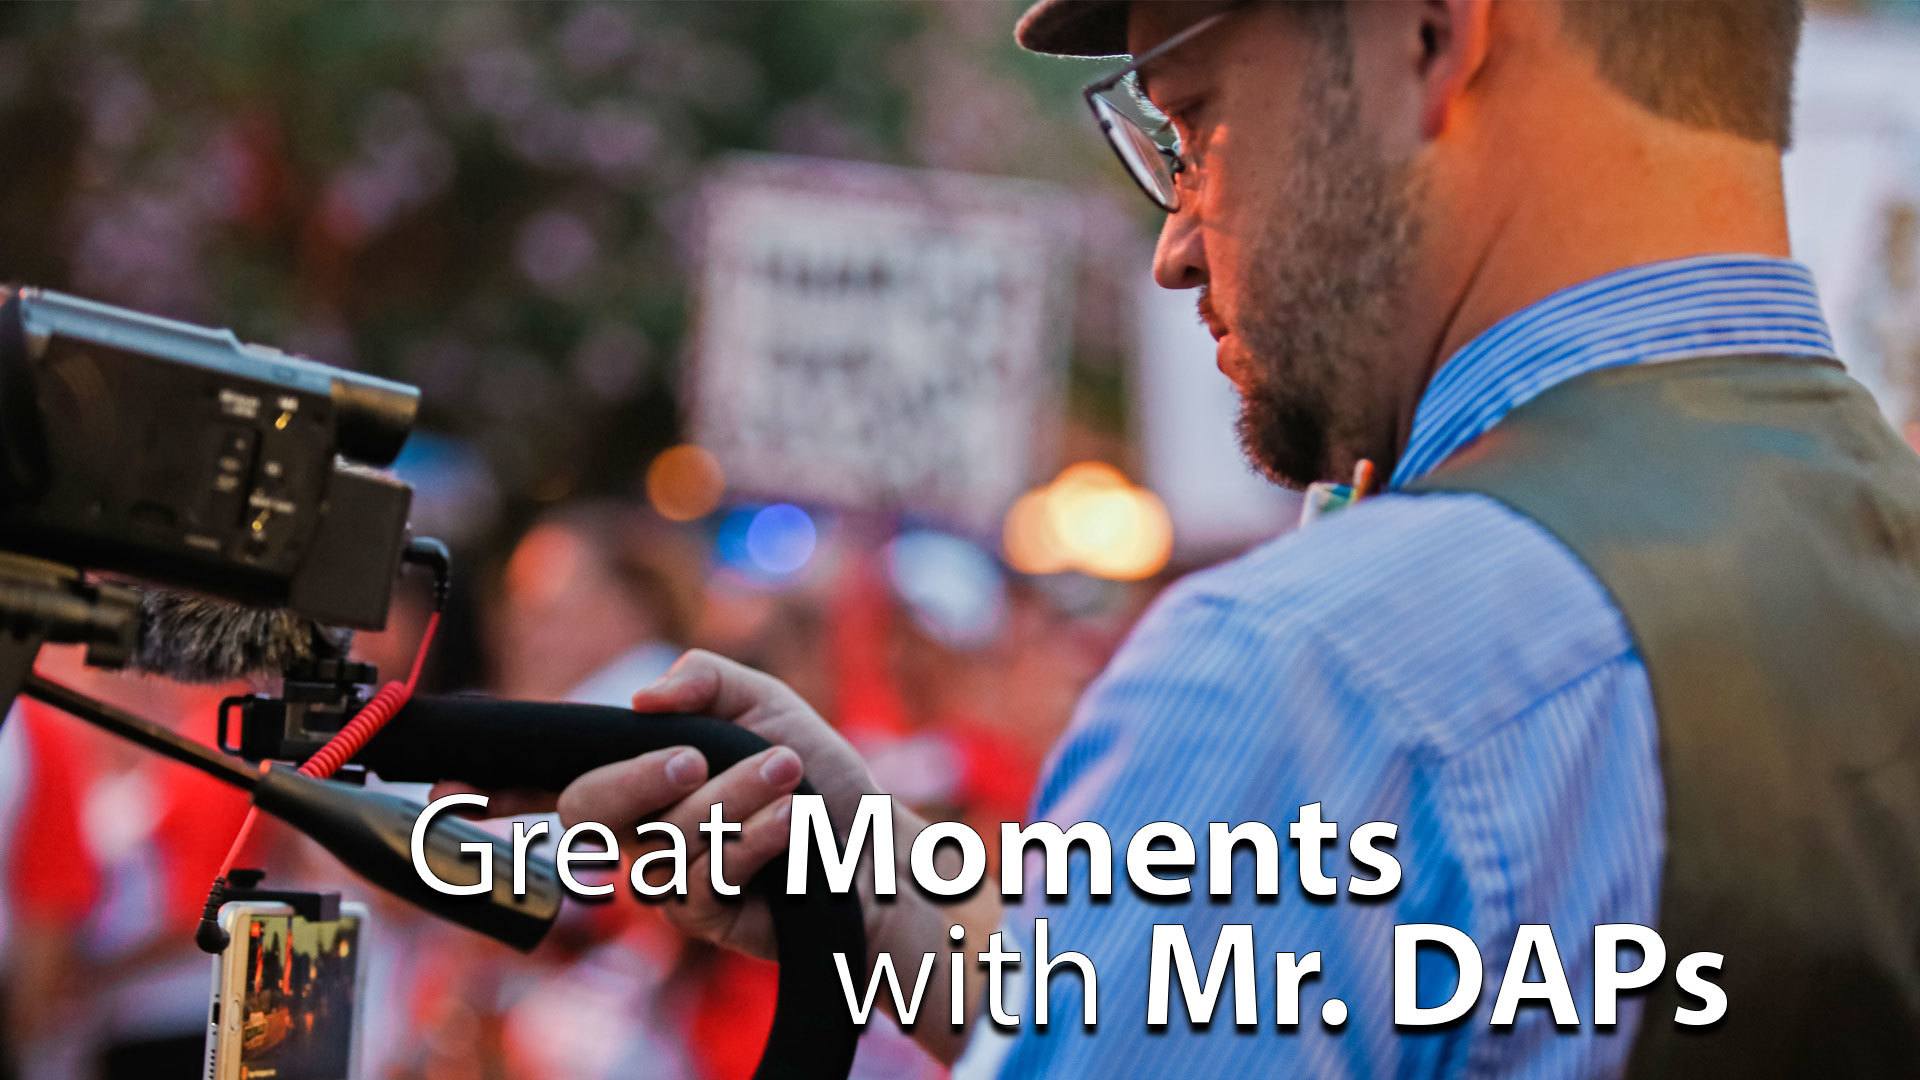 Halloween, Kermit, and CHOC Walk! – Great Moments with Mr. DAPs